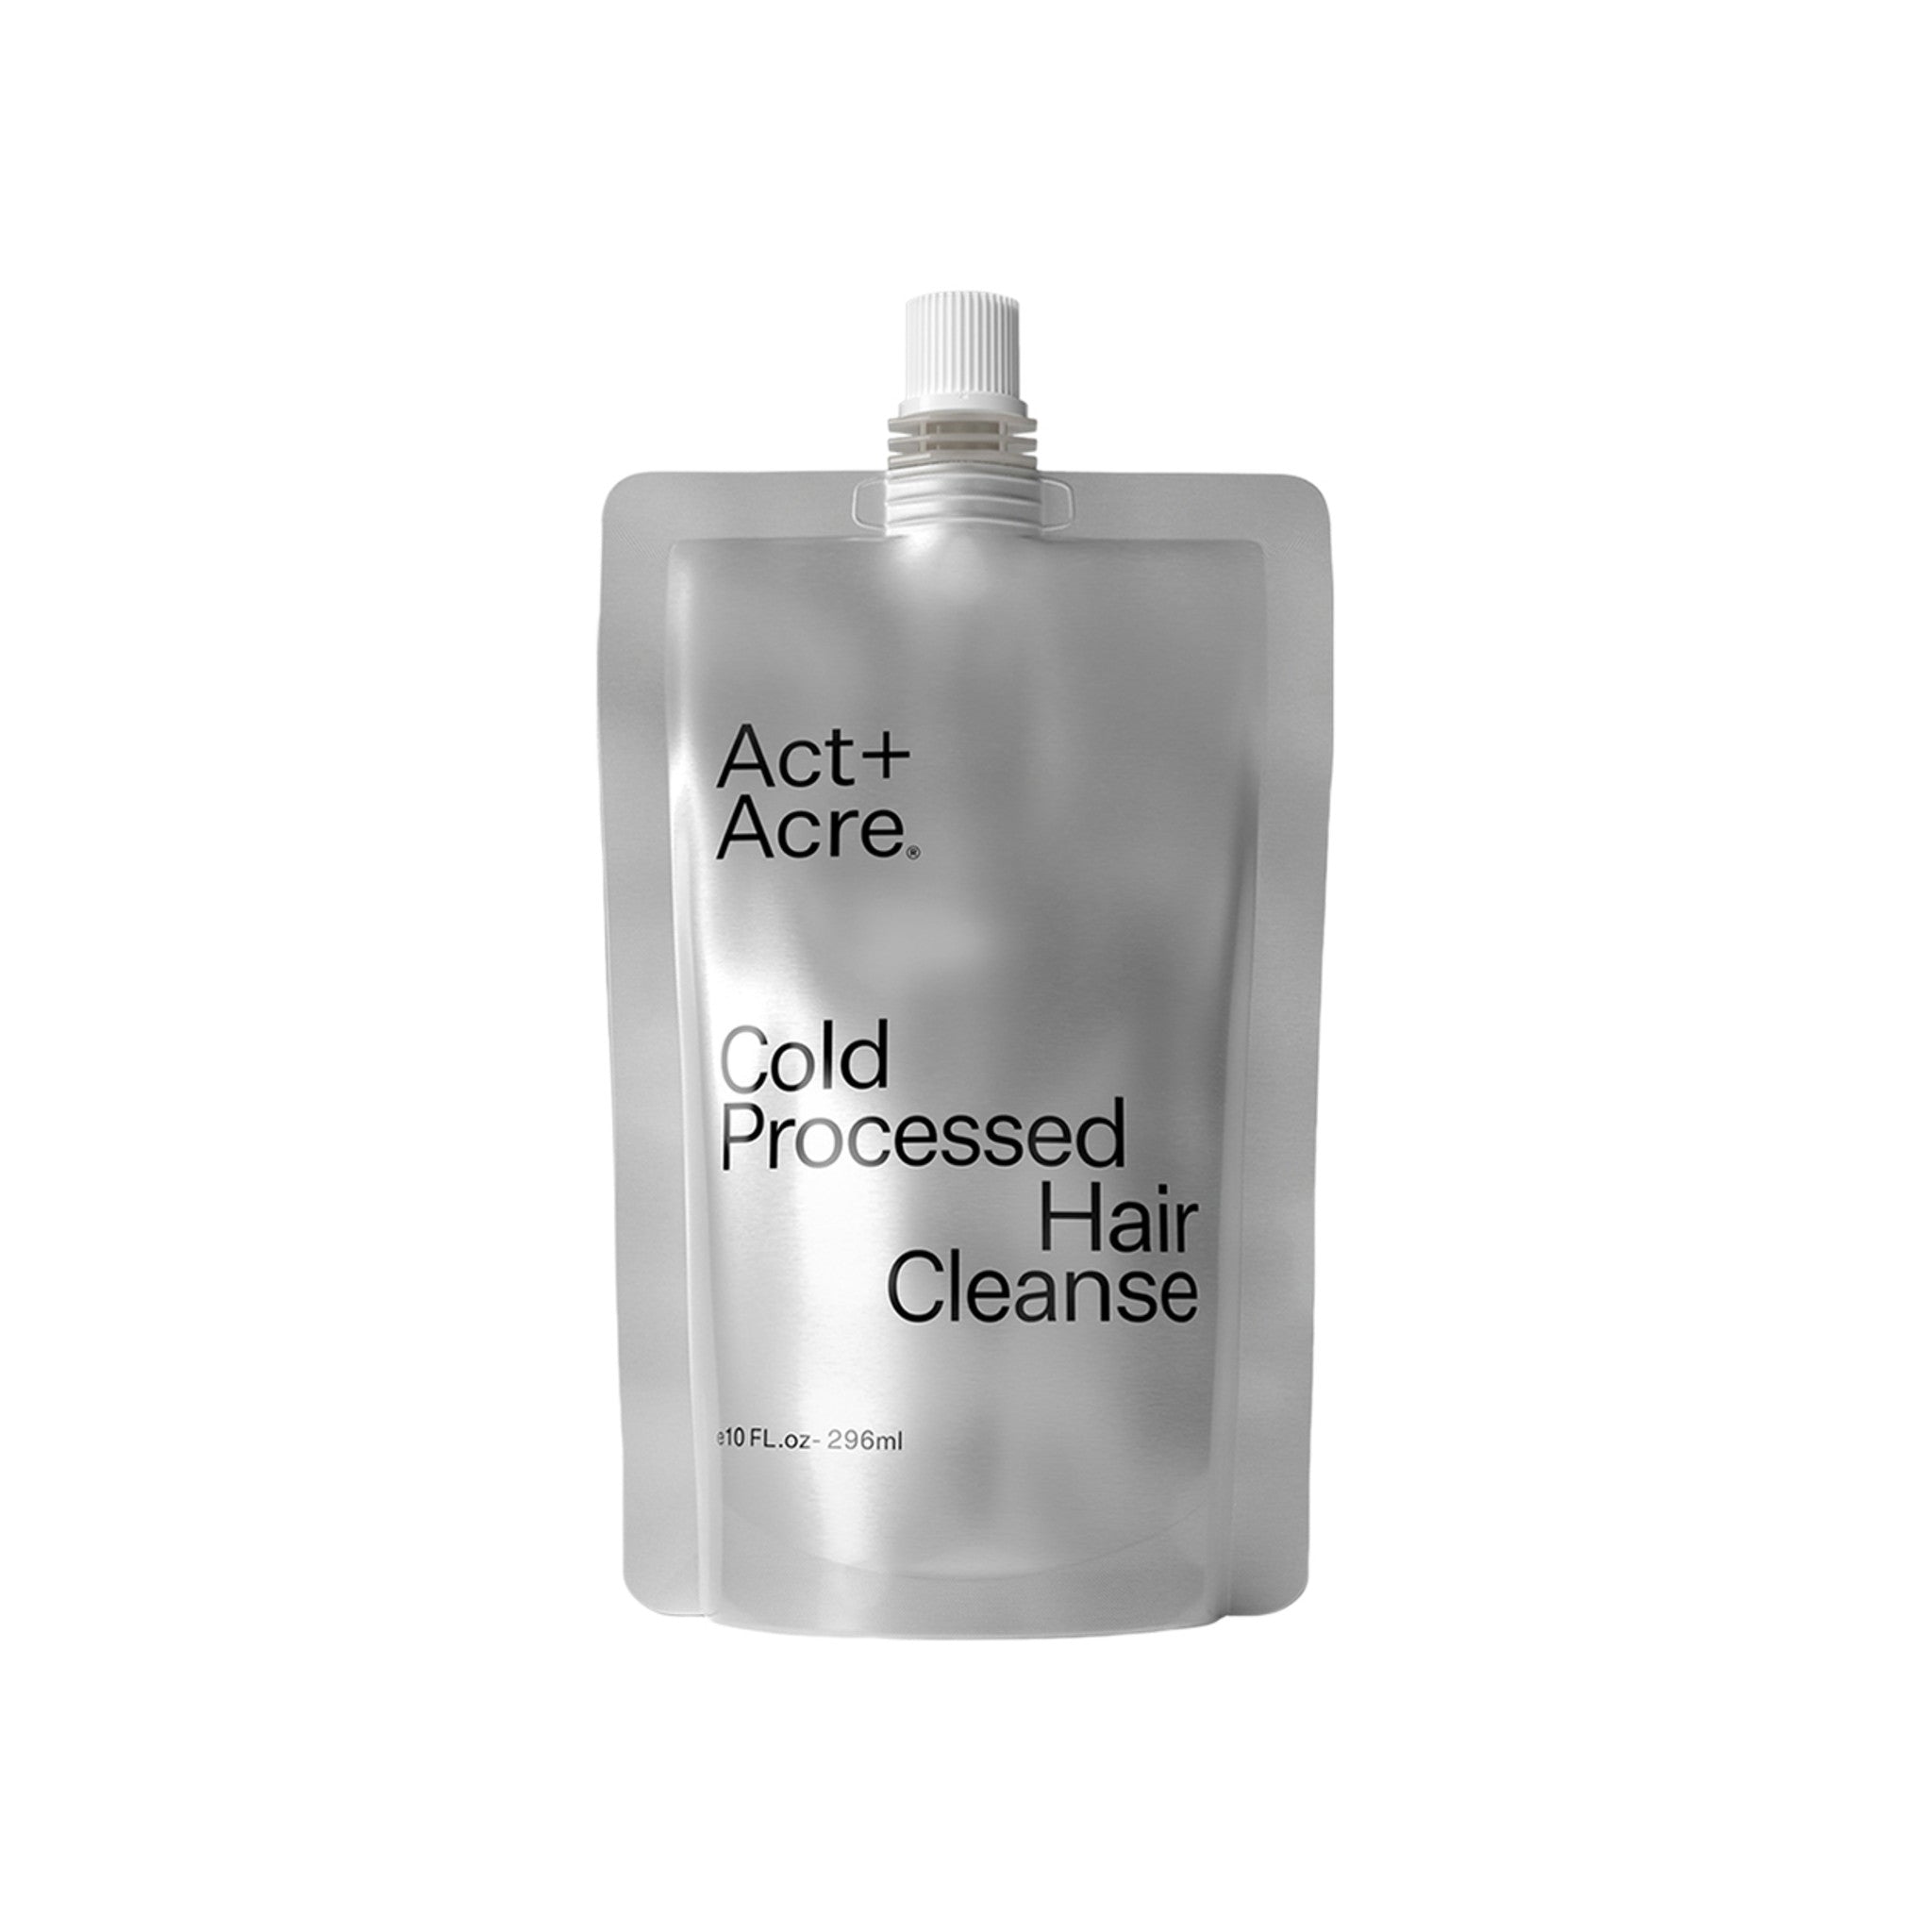 Act+Acre Refill: Cold Processed Hair Cleanse main image.